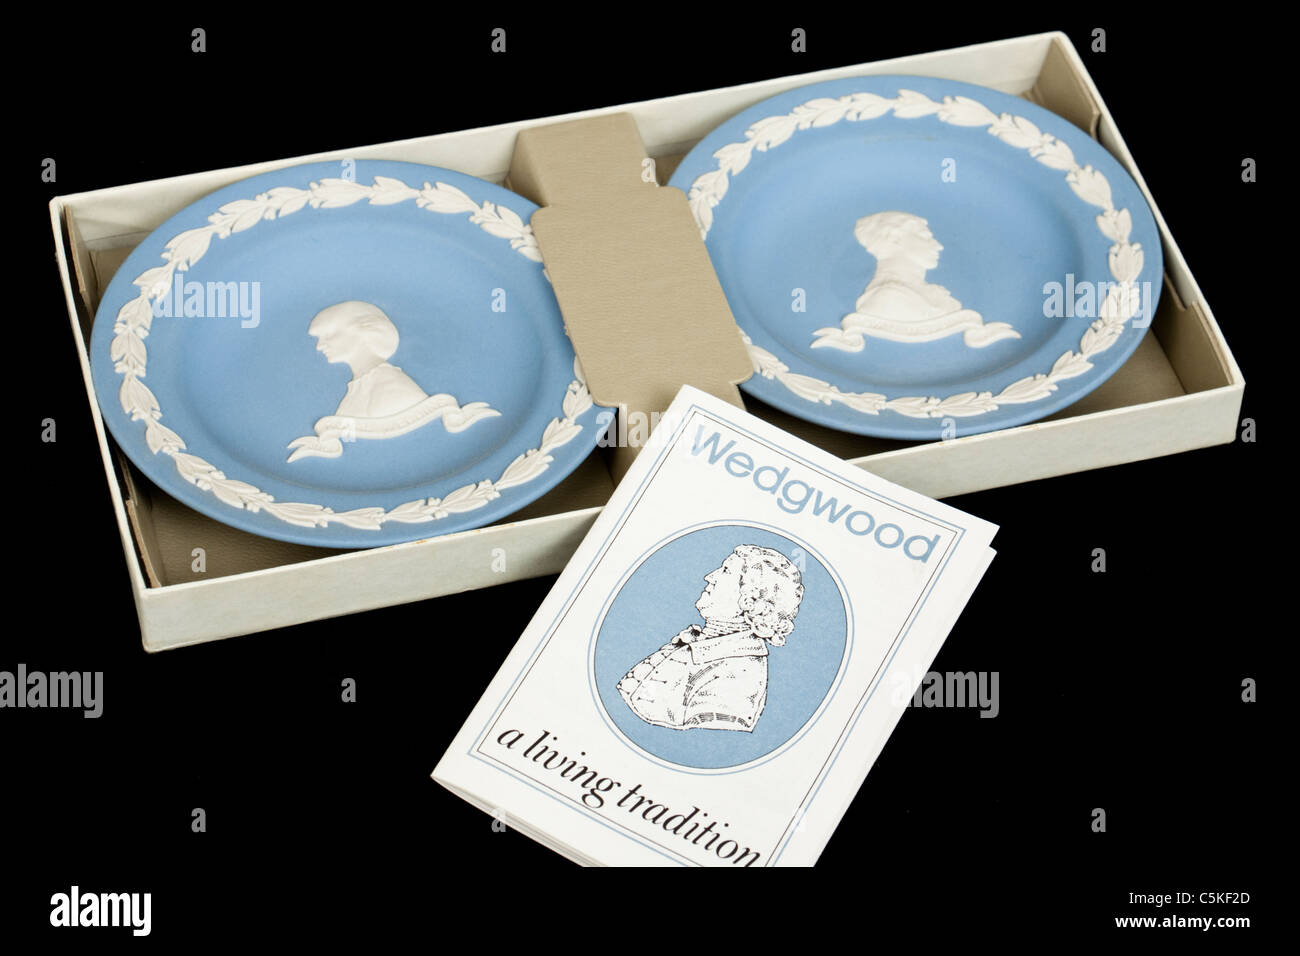 Pair of Wedgwood blue Jasperware plates commemorating the wedding of Prince Charles and Lady Diana Spencer (29th July 1981) Stock Photo